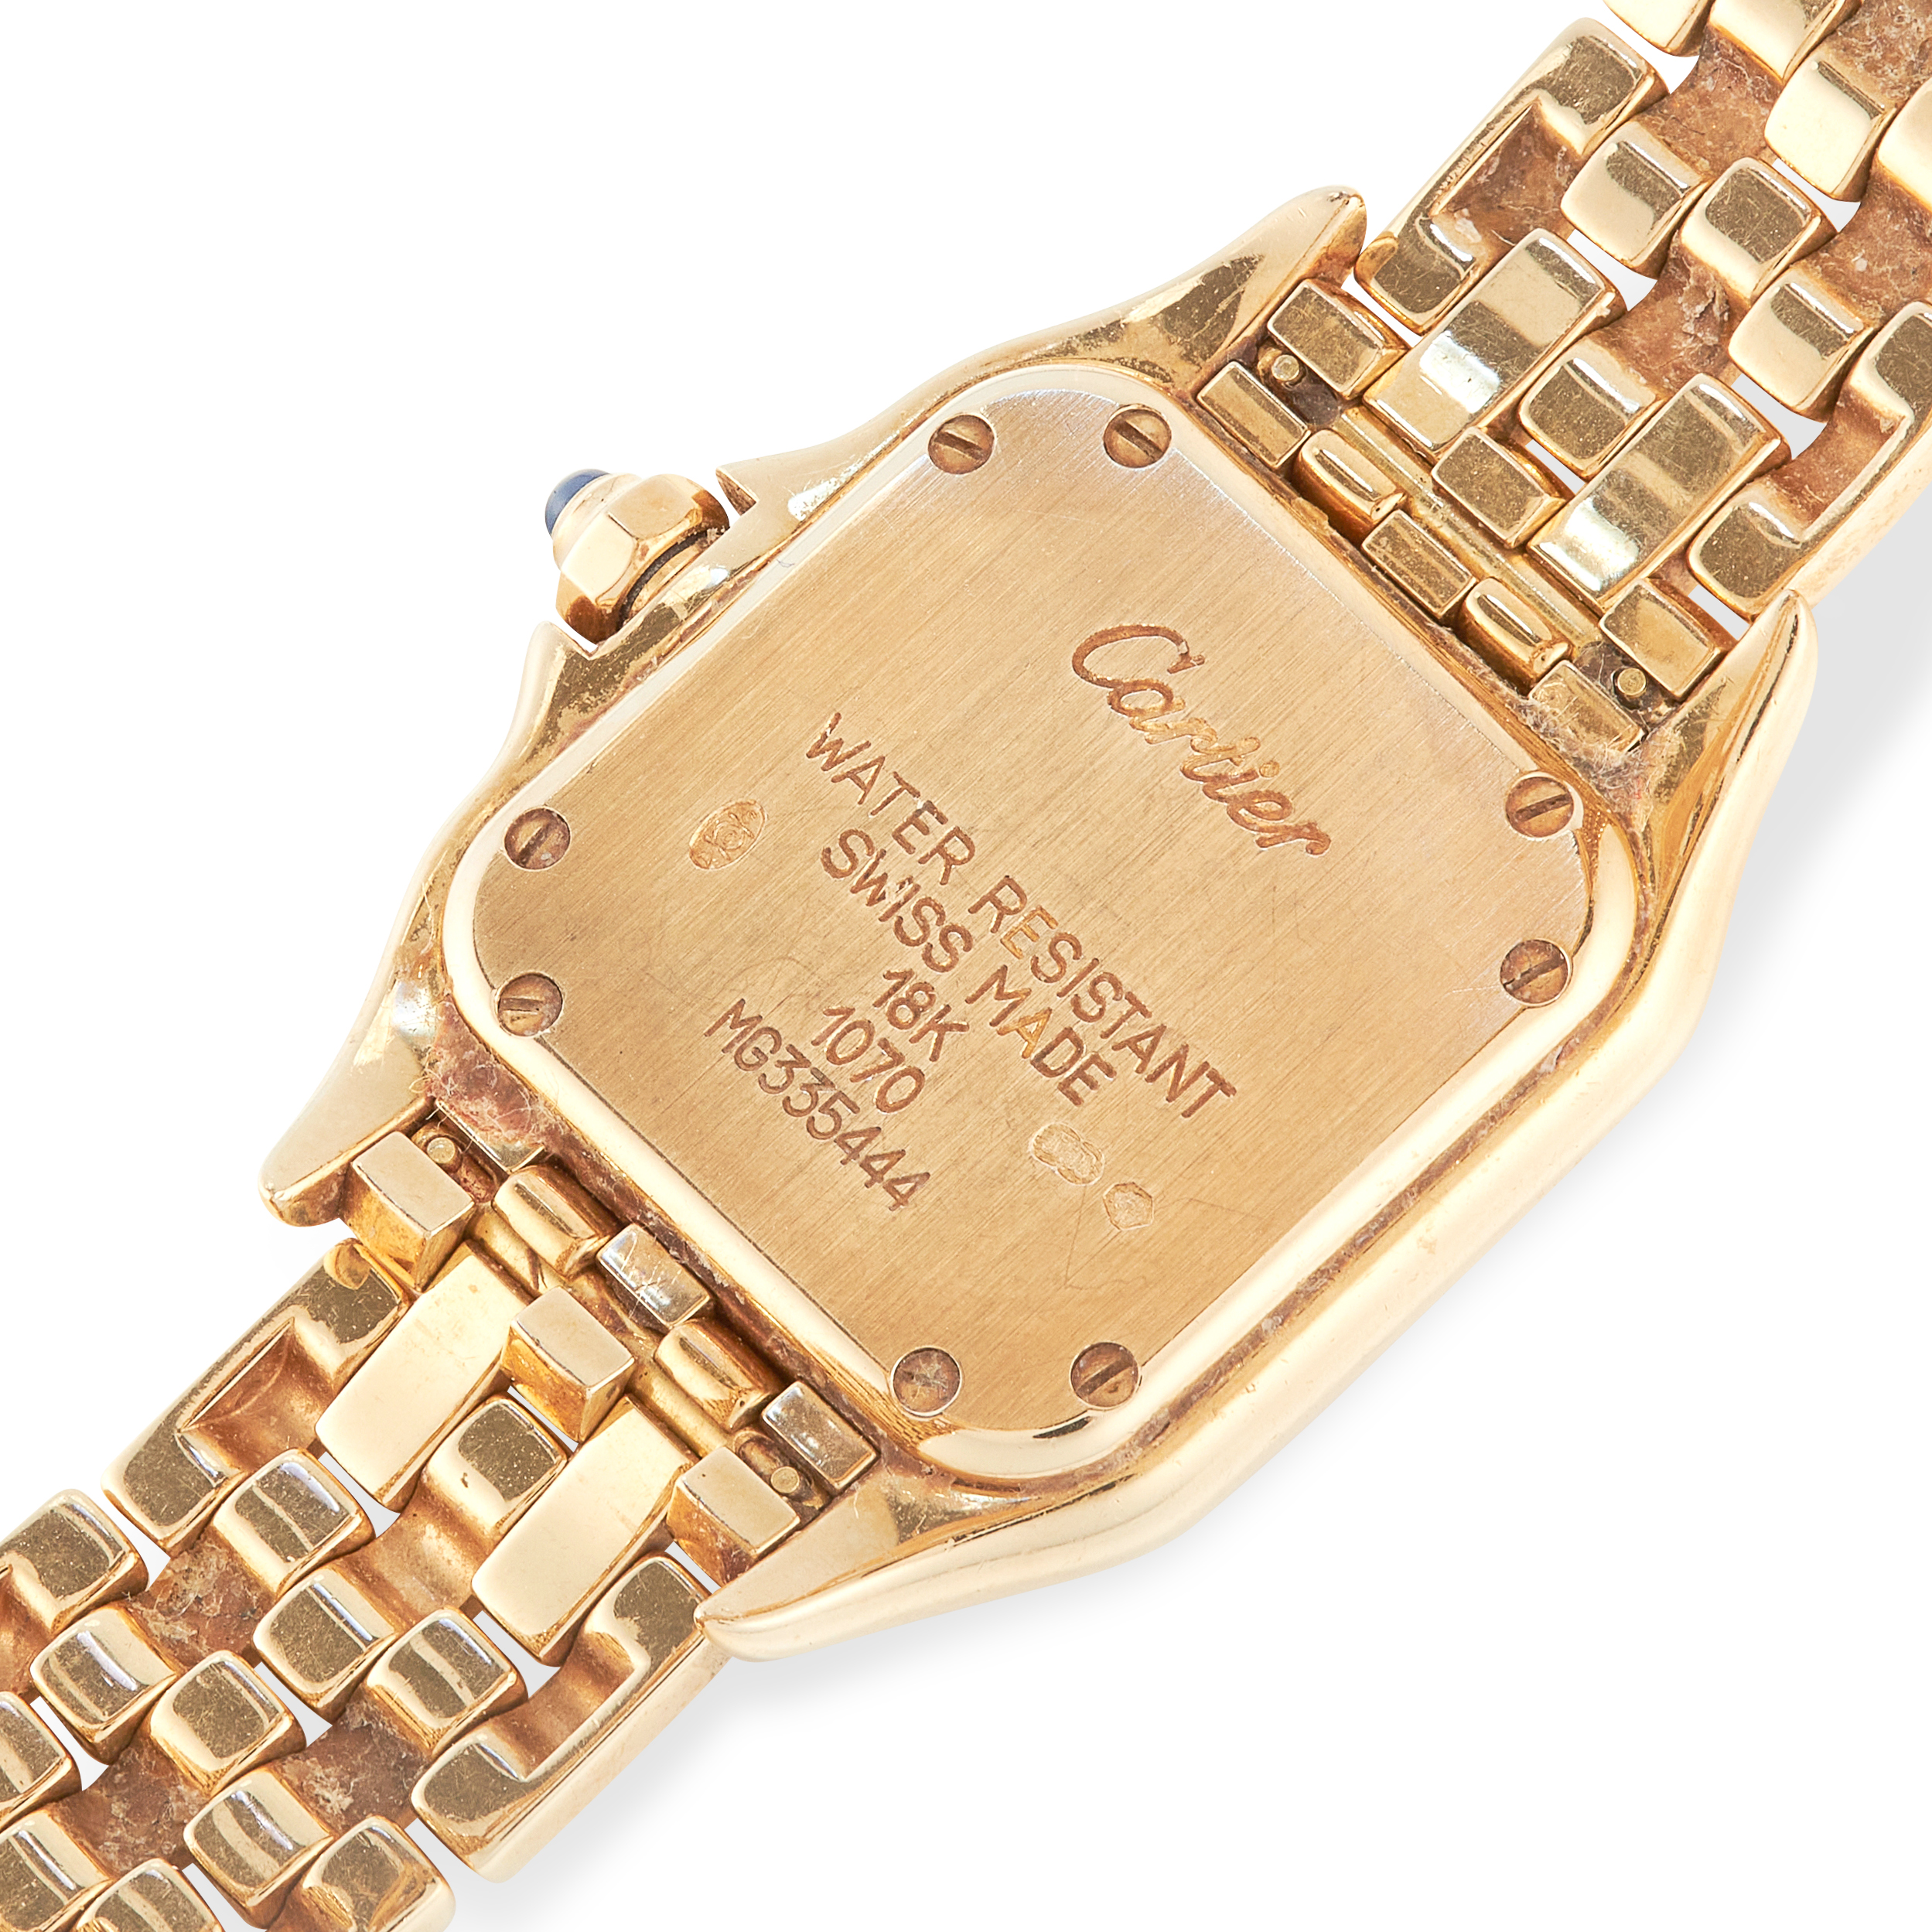 A LADIES PANTHERE DE CARTIER WRIST WATCH, CARTIER in 18ct yellow gold, the face with Roman numerals, - Image 3 of 3